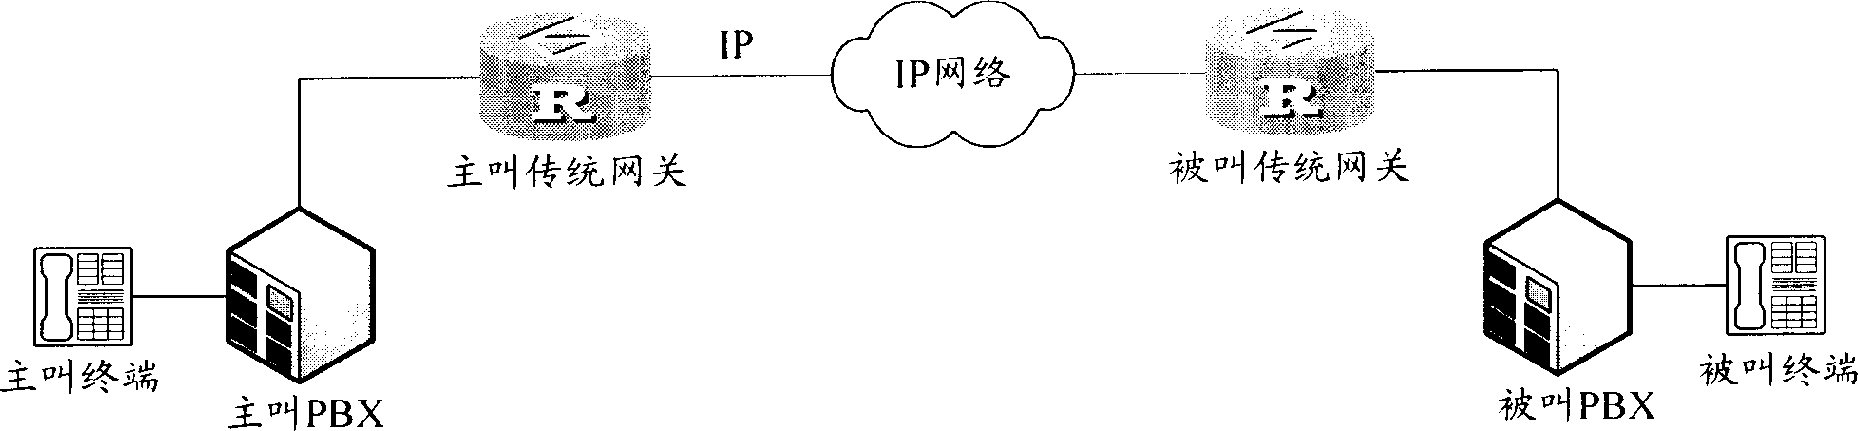 System and method for realizing Internet protocol voice service